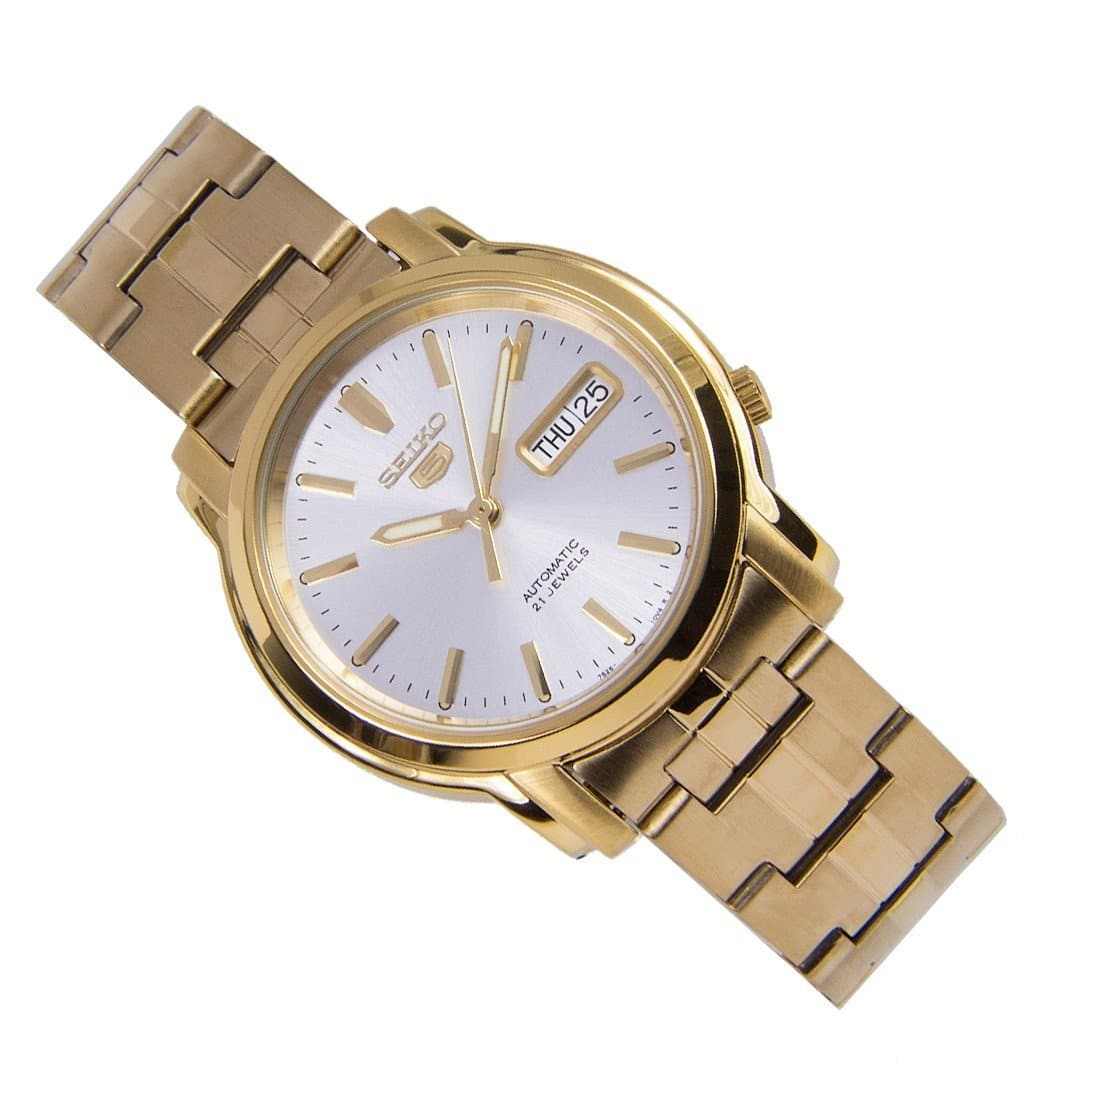 Seiko 5 Classic Mens Size Silver Dial Gold Plated Stainless Steel Strap Watch SNKK74K1 - Diligence1International